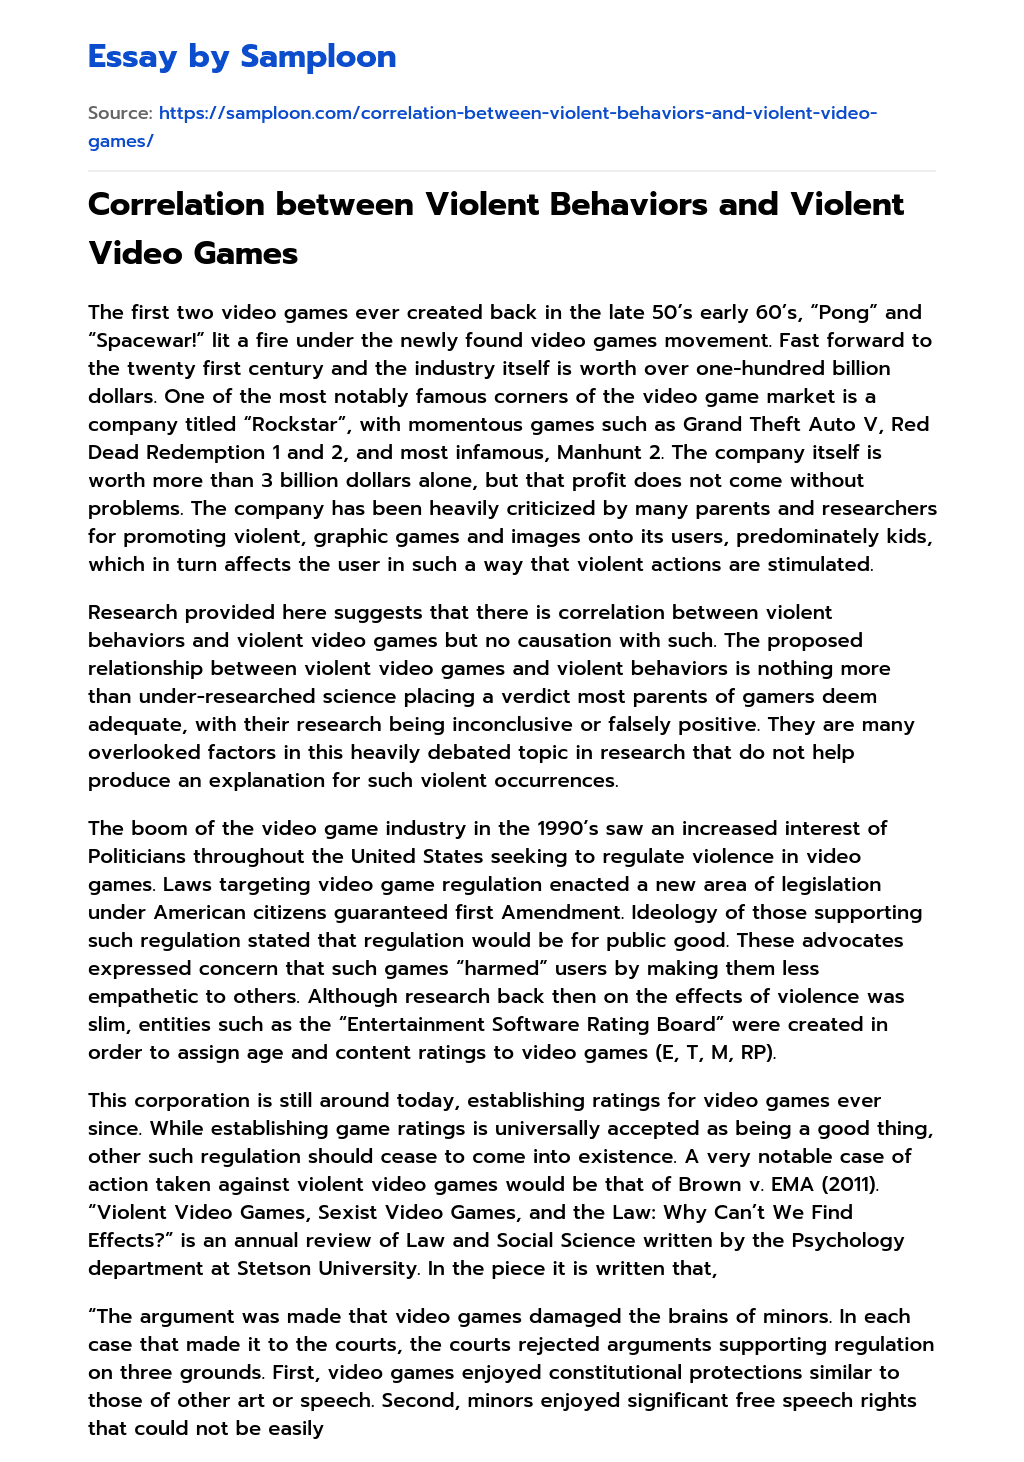 write an essay about violent video games